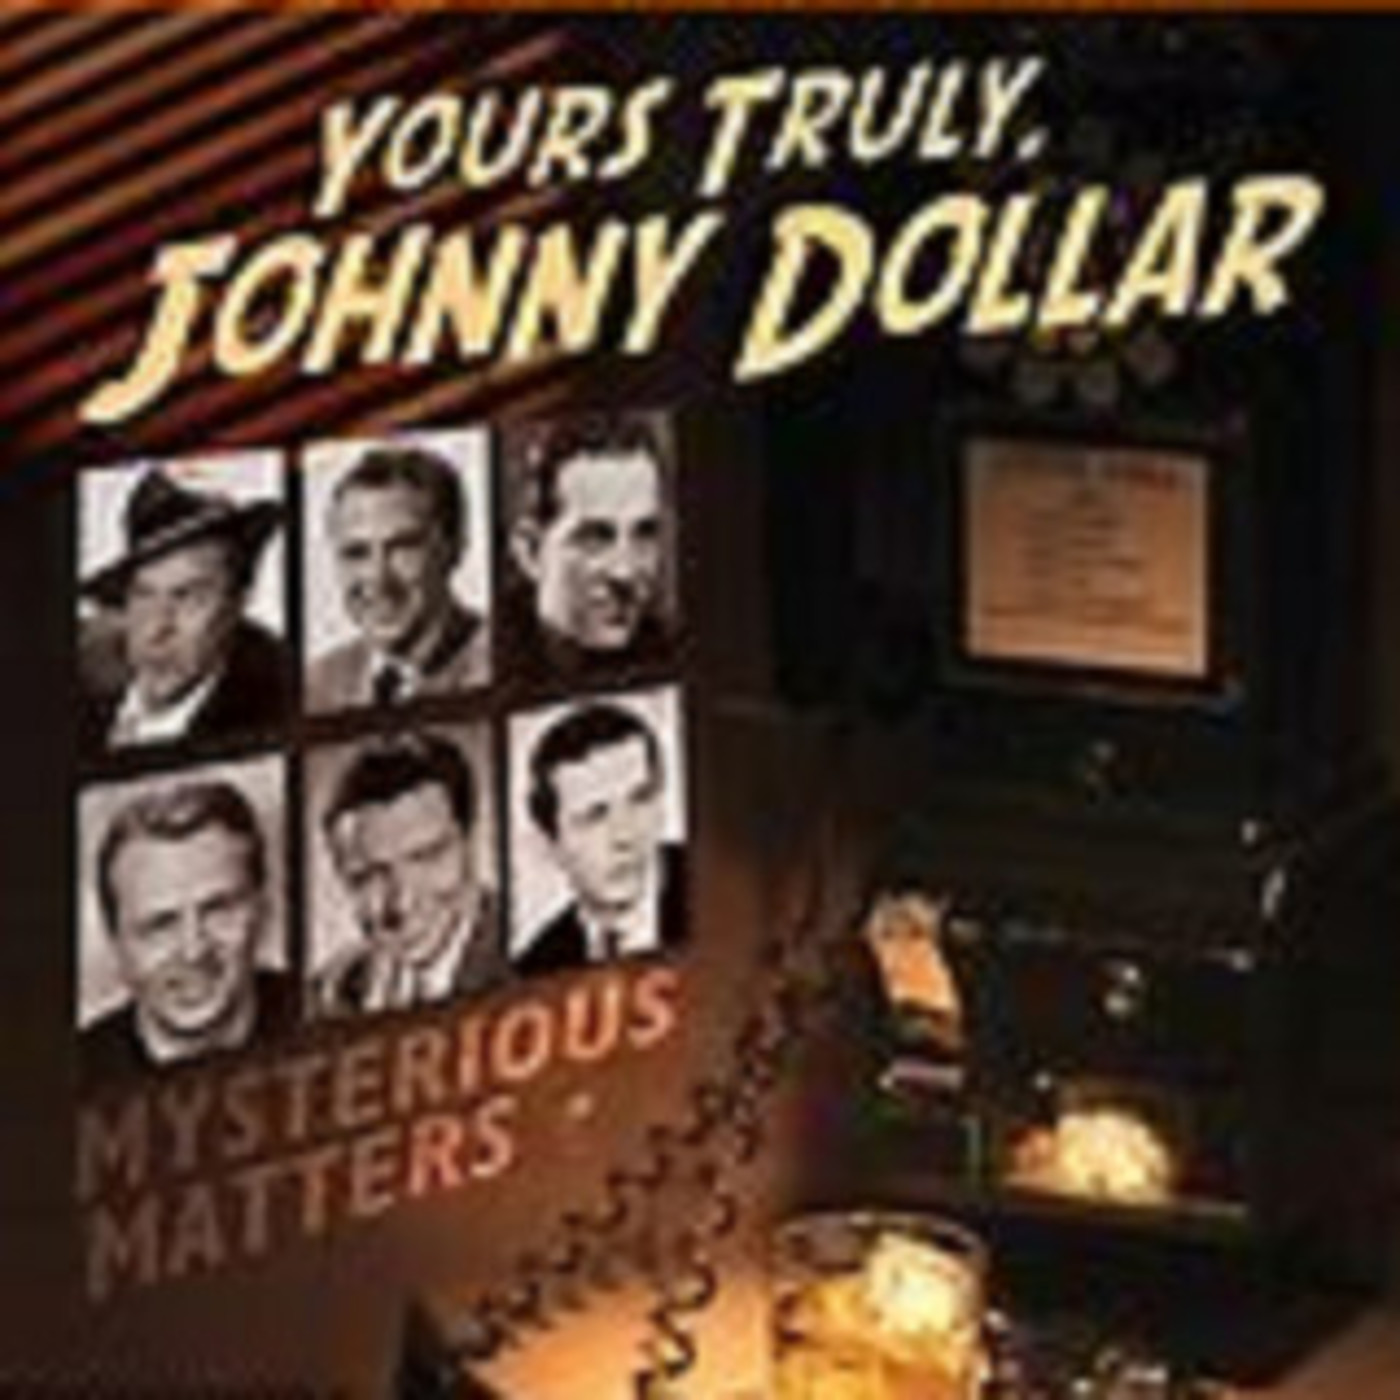 Yours Truly, Johnny Dollar - 070162, episode 798 - The Vociferous Dolphin Matter